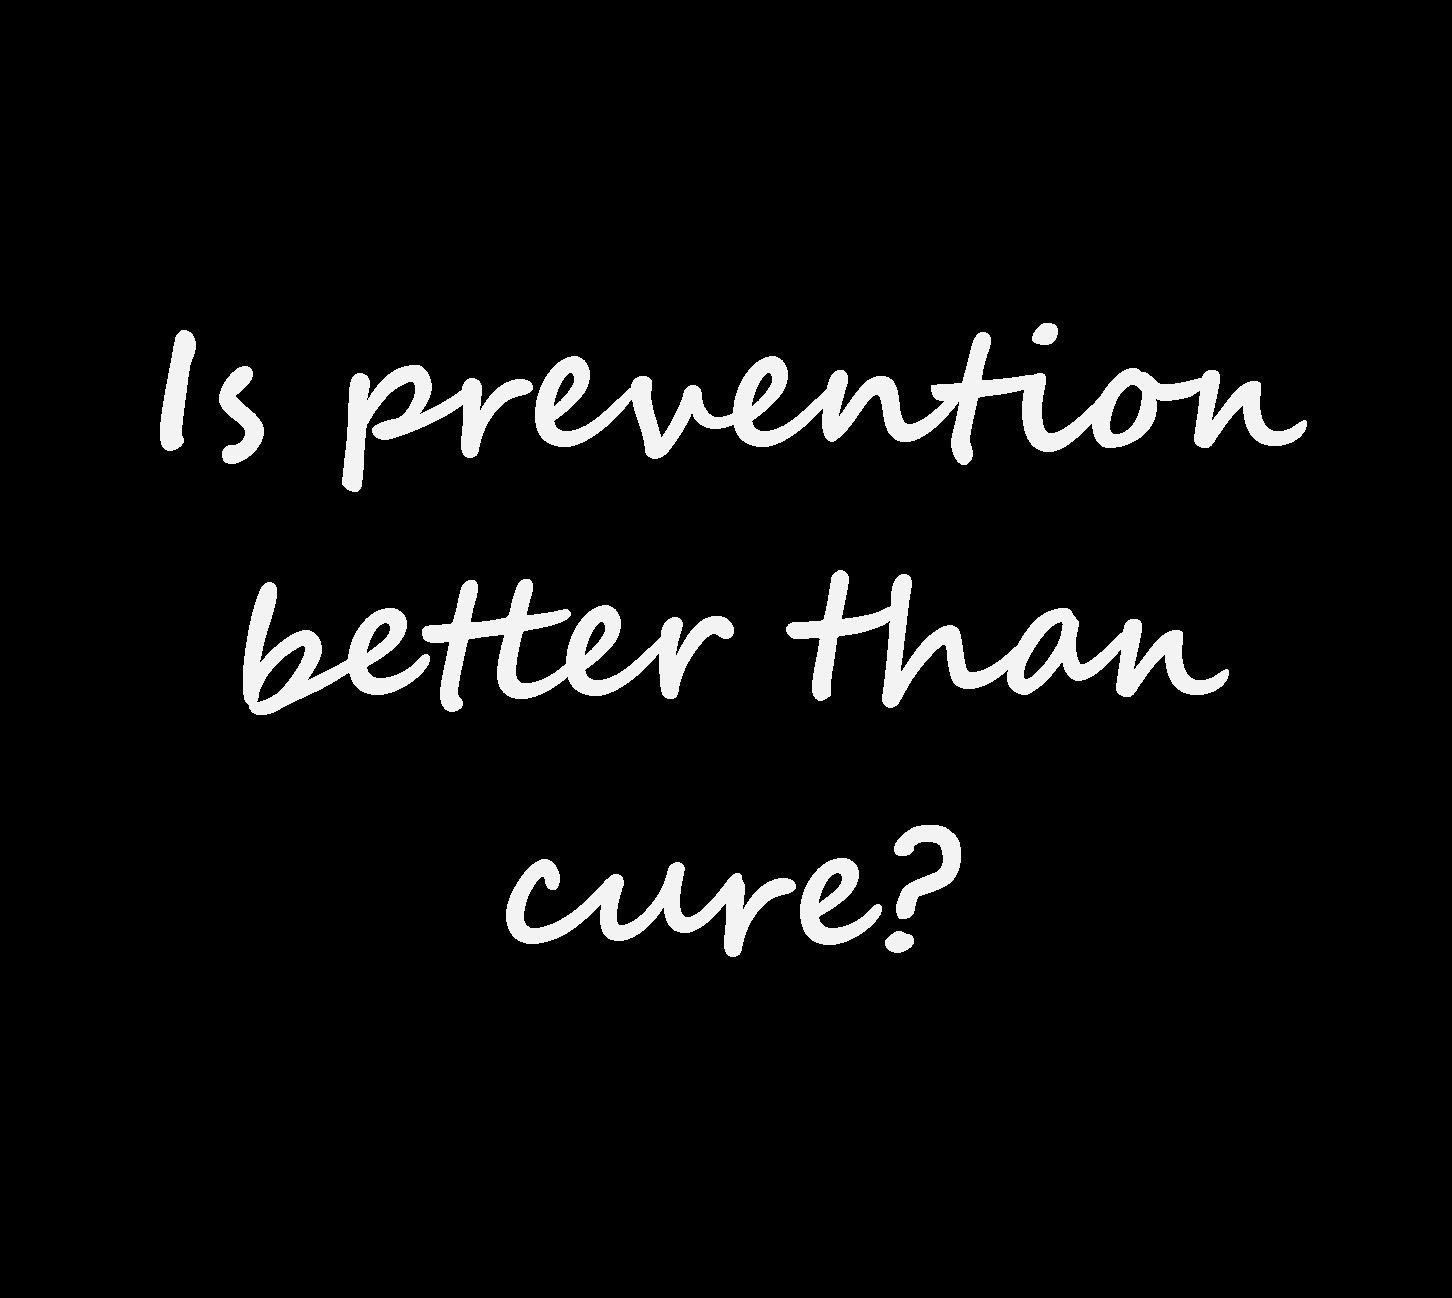 Image of a blackboard, with the words 'Is prevention better than cure?'